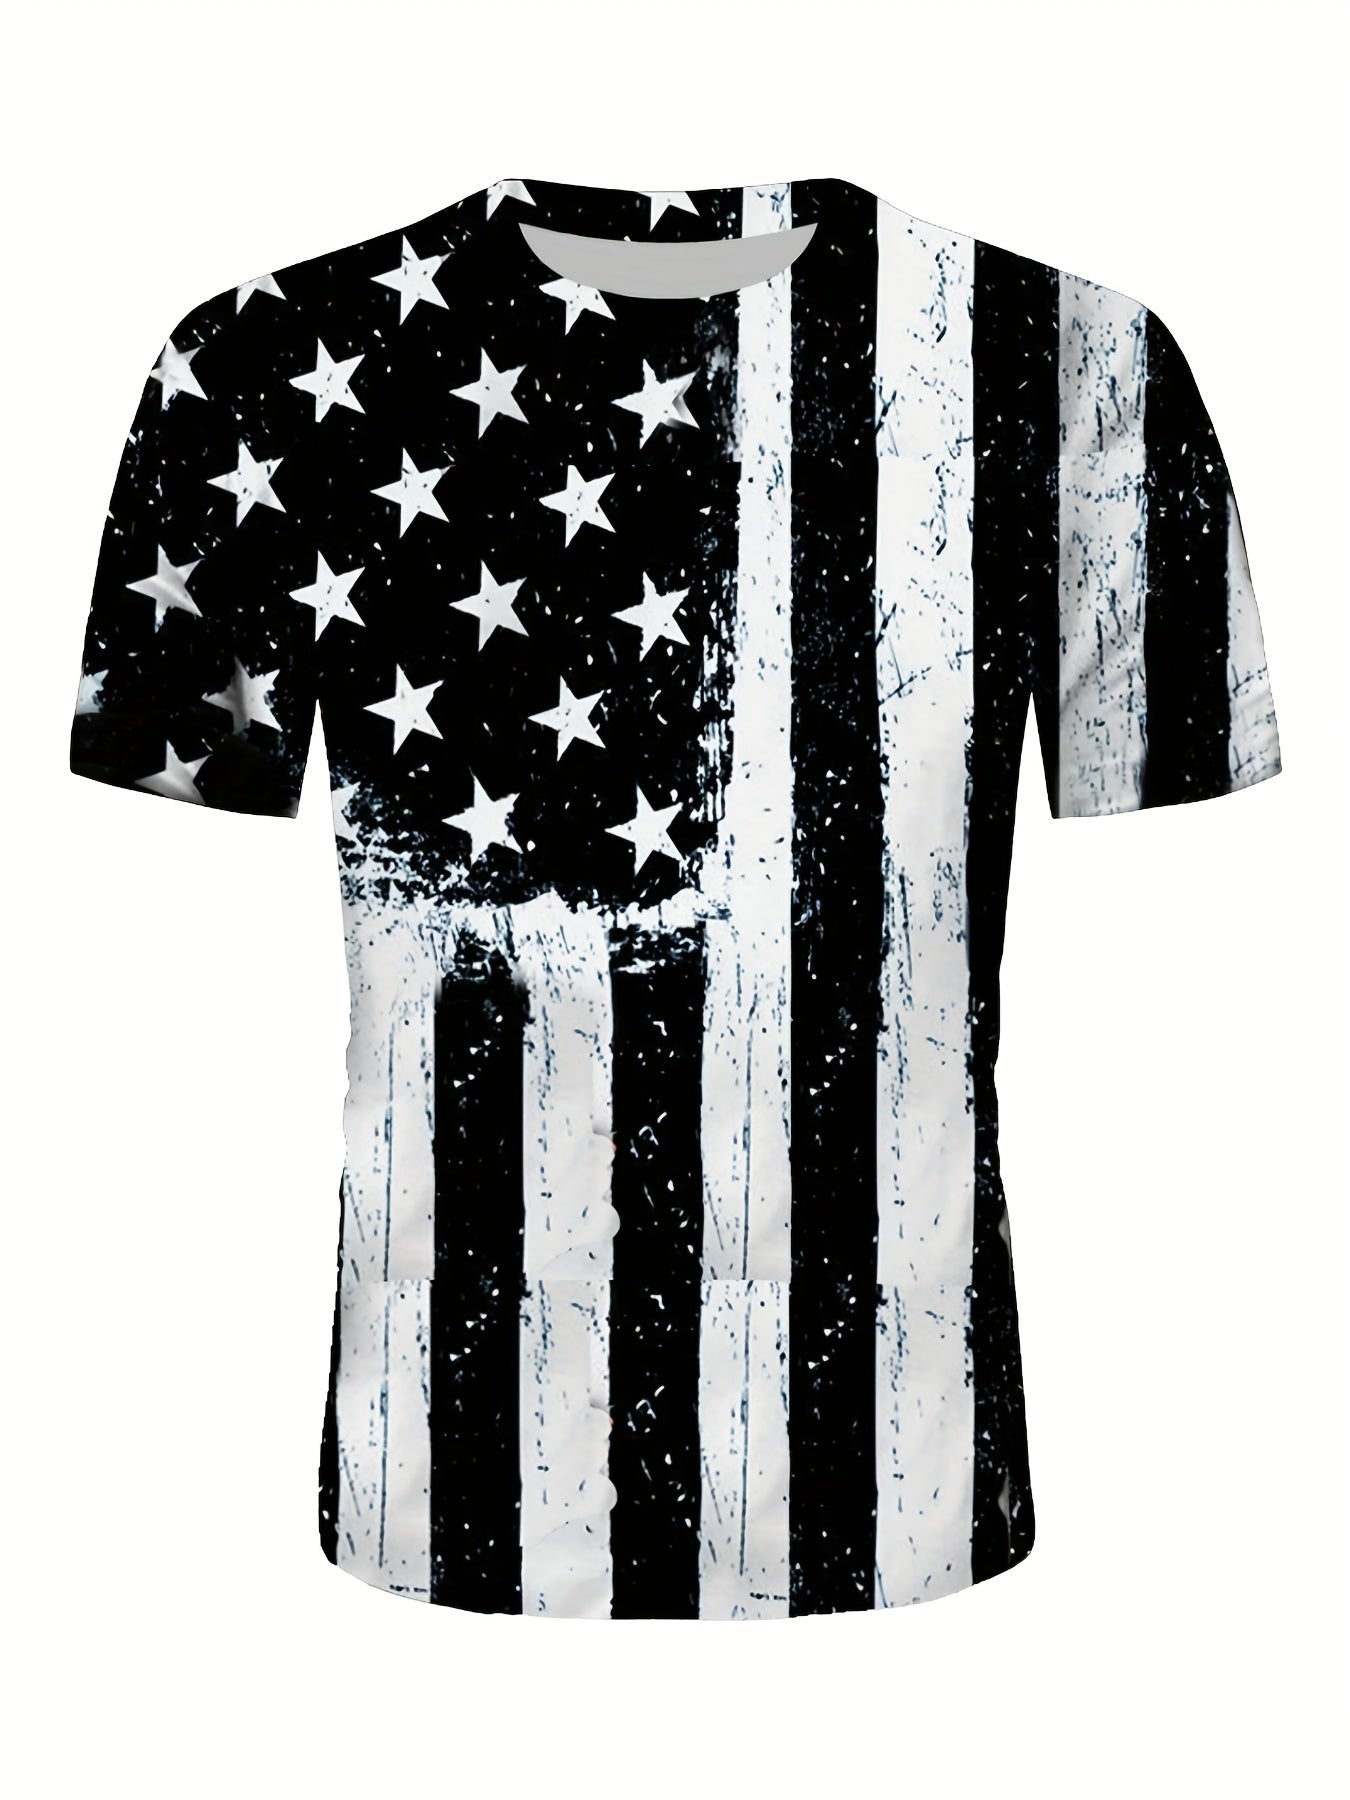 Distressed American Flag 3D Digital Pattern Print Graphic T-shirts, Independence Day The 4th Of July, Causal Tees, Short Sleeves Comfortable Pullover Tops, Men's Summer Clothing